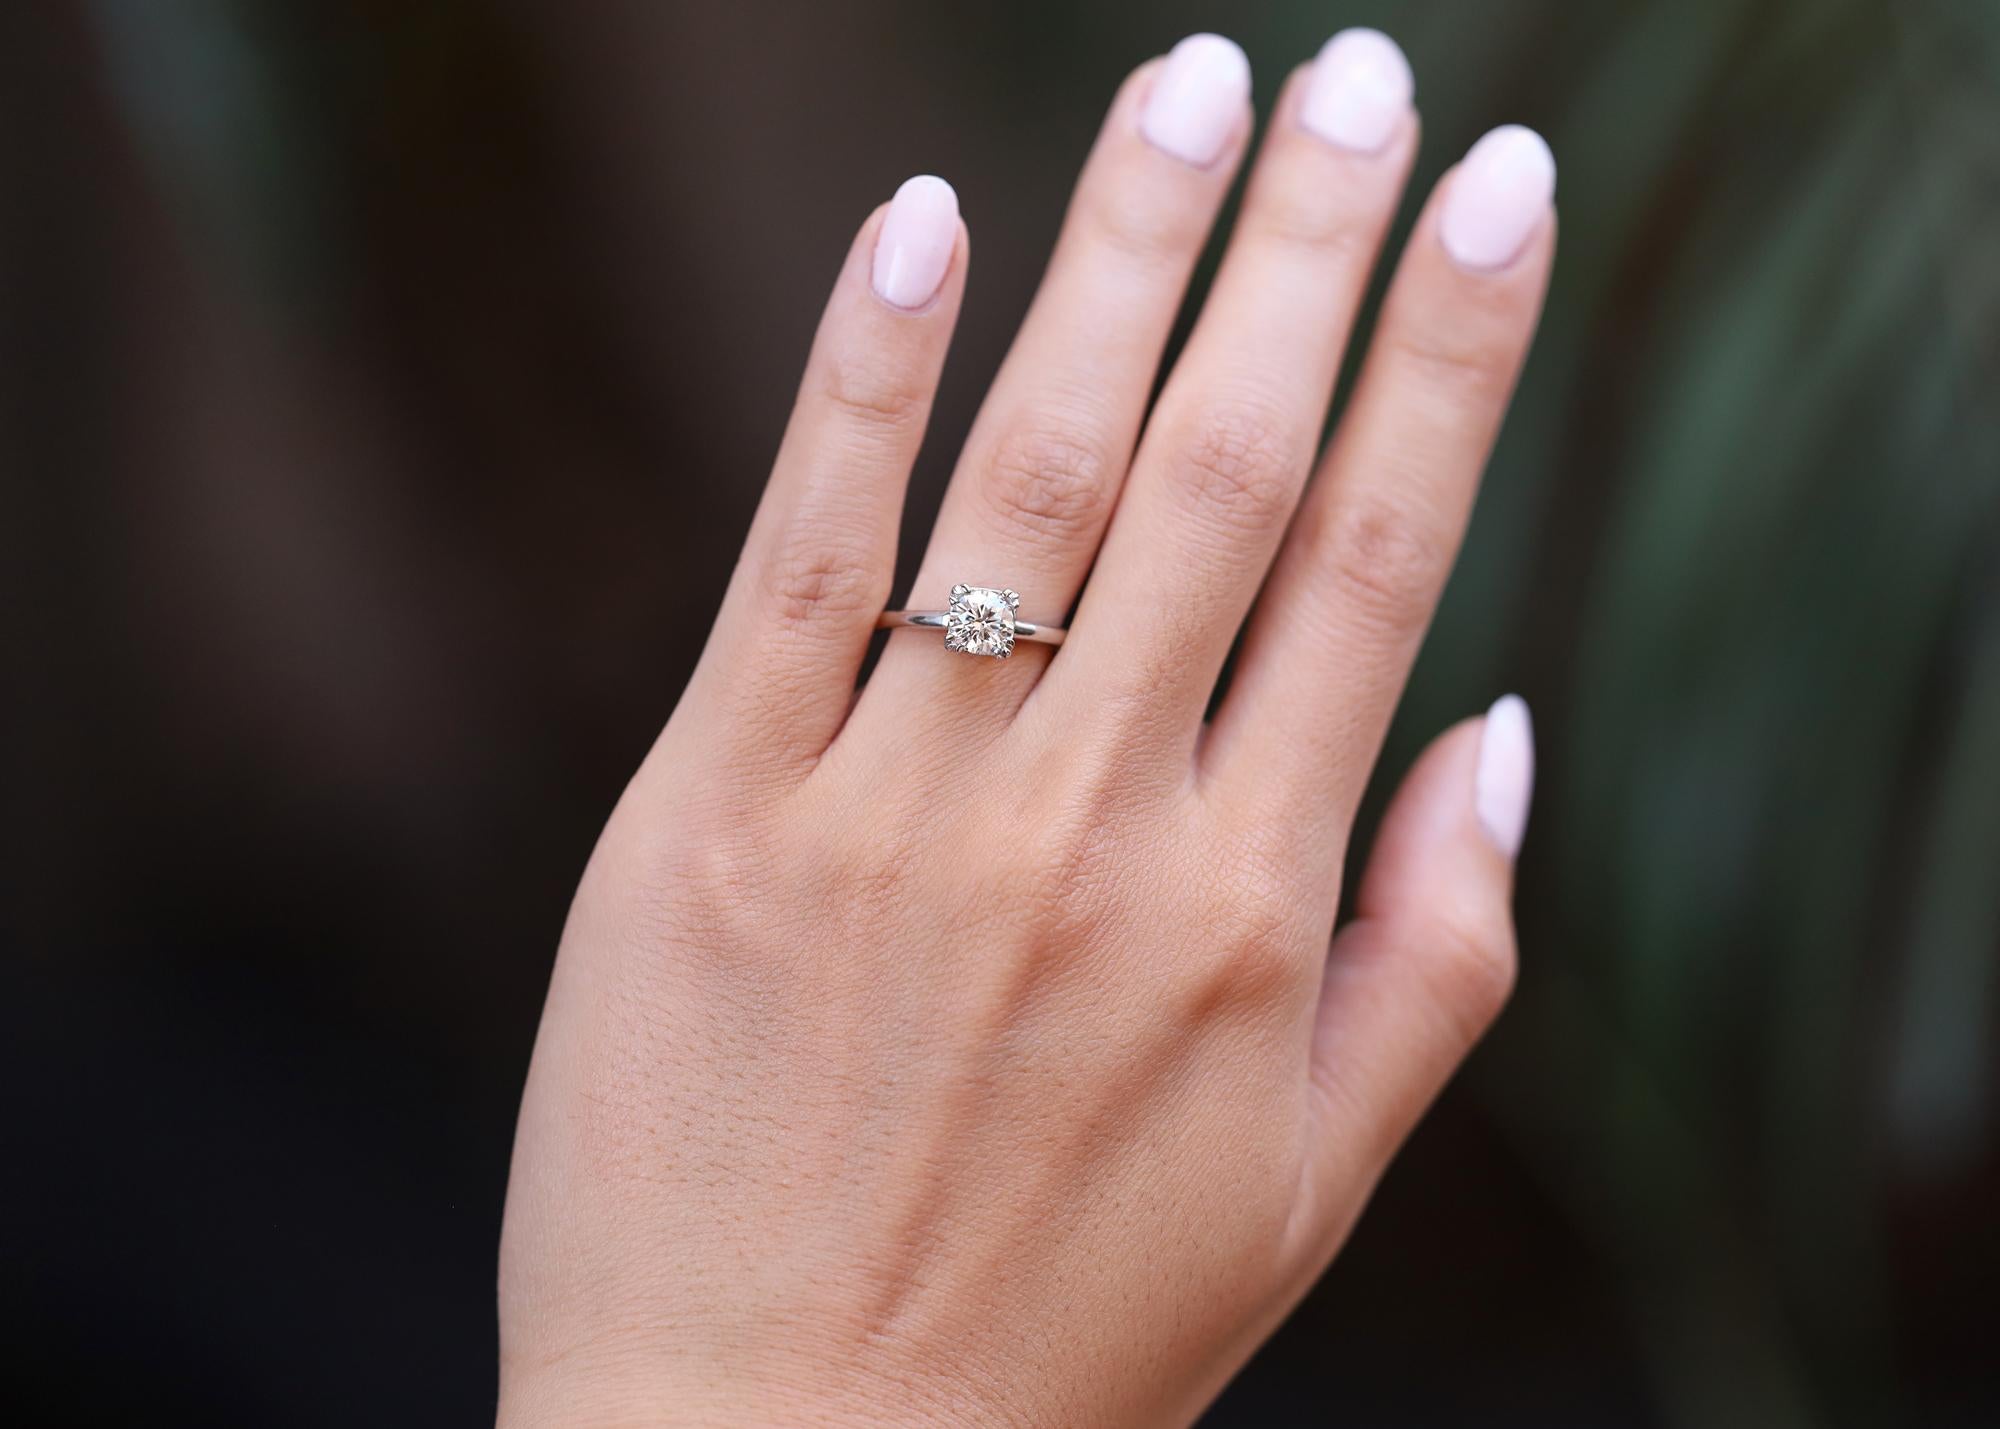 This classic mid century solitaire engagement ring is an excellent choice for those seeking value and eco-friendly sustainability. Showcasing a 0.80 carat round brilliant diamond with VS1 clarity, sparkling with modern brilliance and fire within.